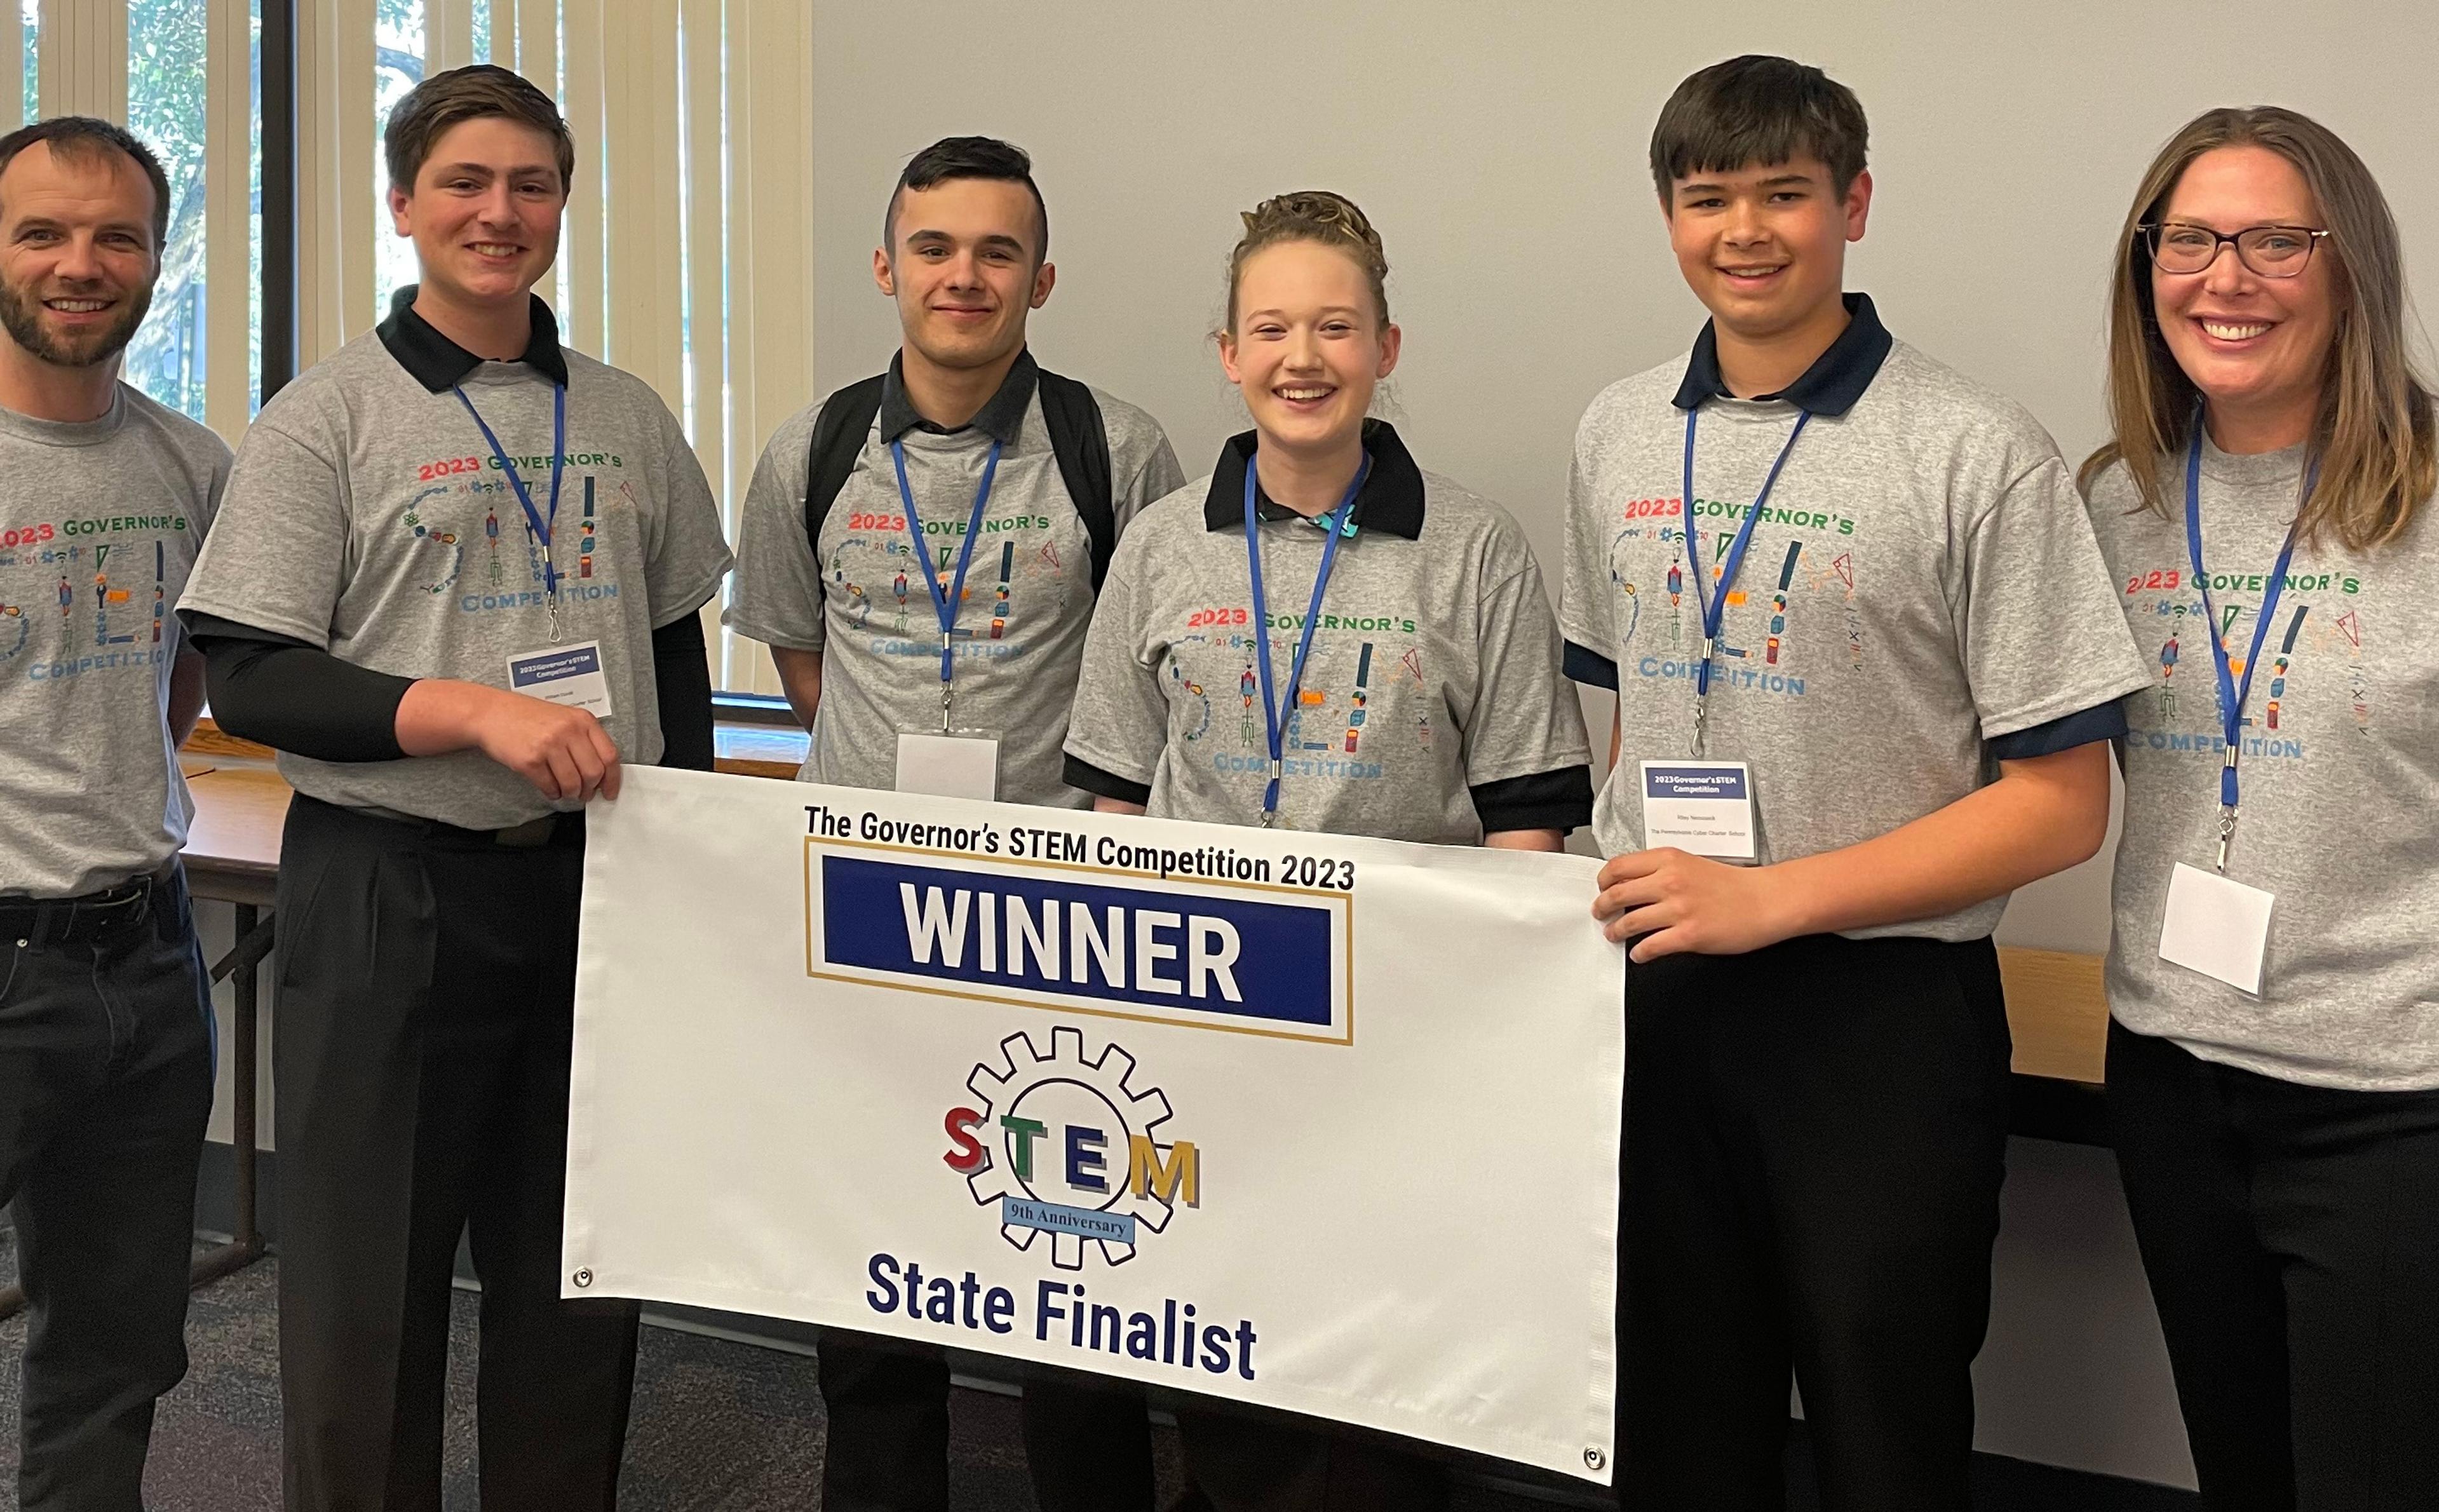 The winning PA Cyber team poses together around a sign that says "Winner."